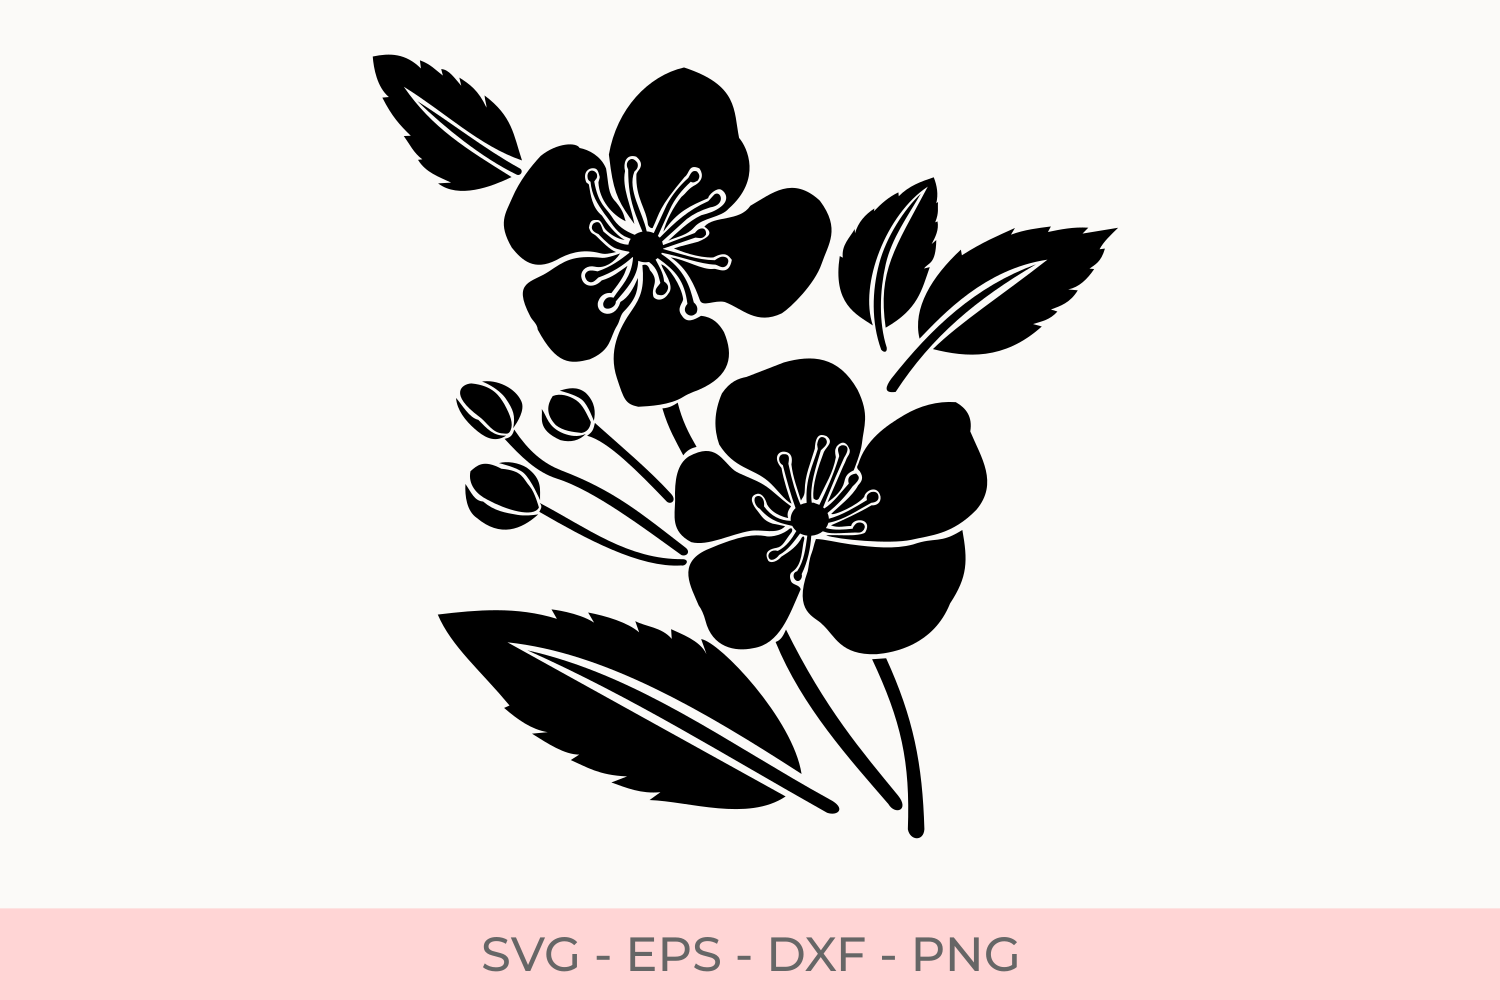 Download Cherry Flowers Silhouette Svg, Cherry Florals Silhouette Svg, Silhouette Svg, Flower Bouquets Svg